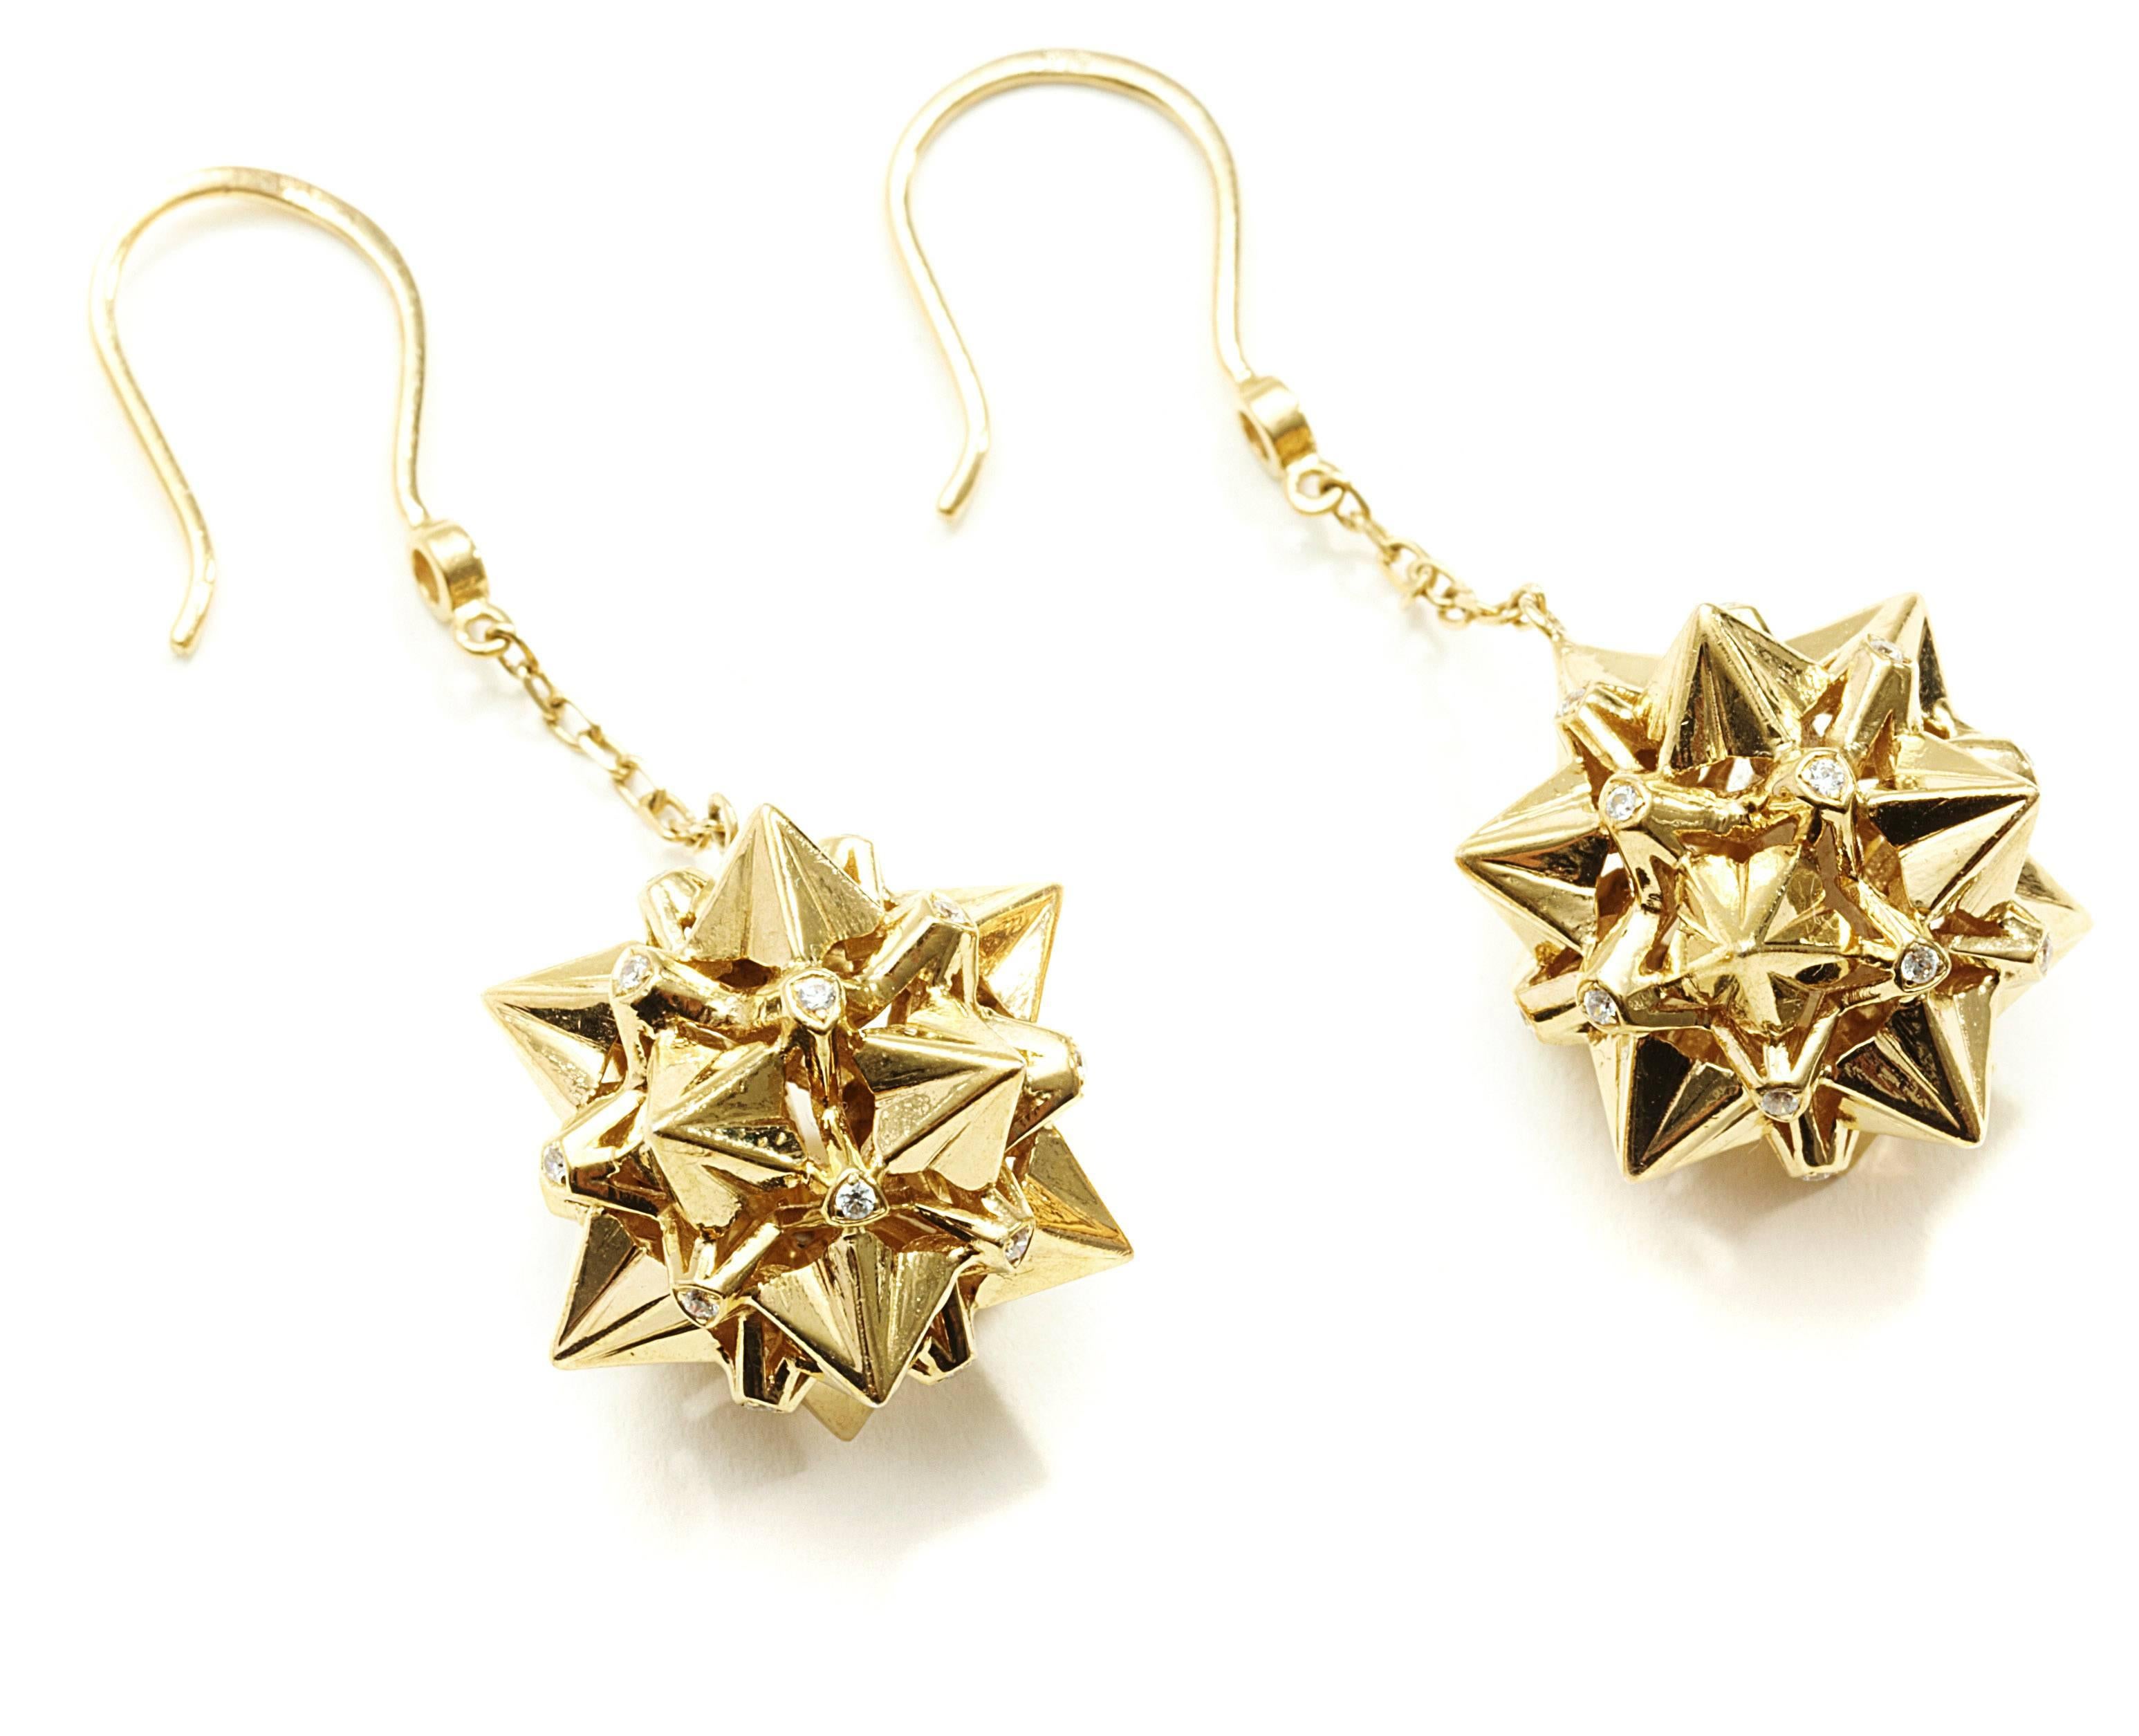 These Nova Diamond and 18K Gold Dangle Earrings are a statement of strength and power. Designer John Brevard used principles of sacred geometry to design these earrings for optimal strength and energy-capture. This piece is limited edition and